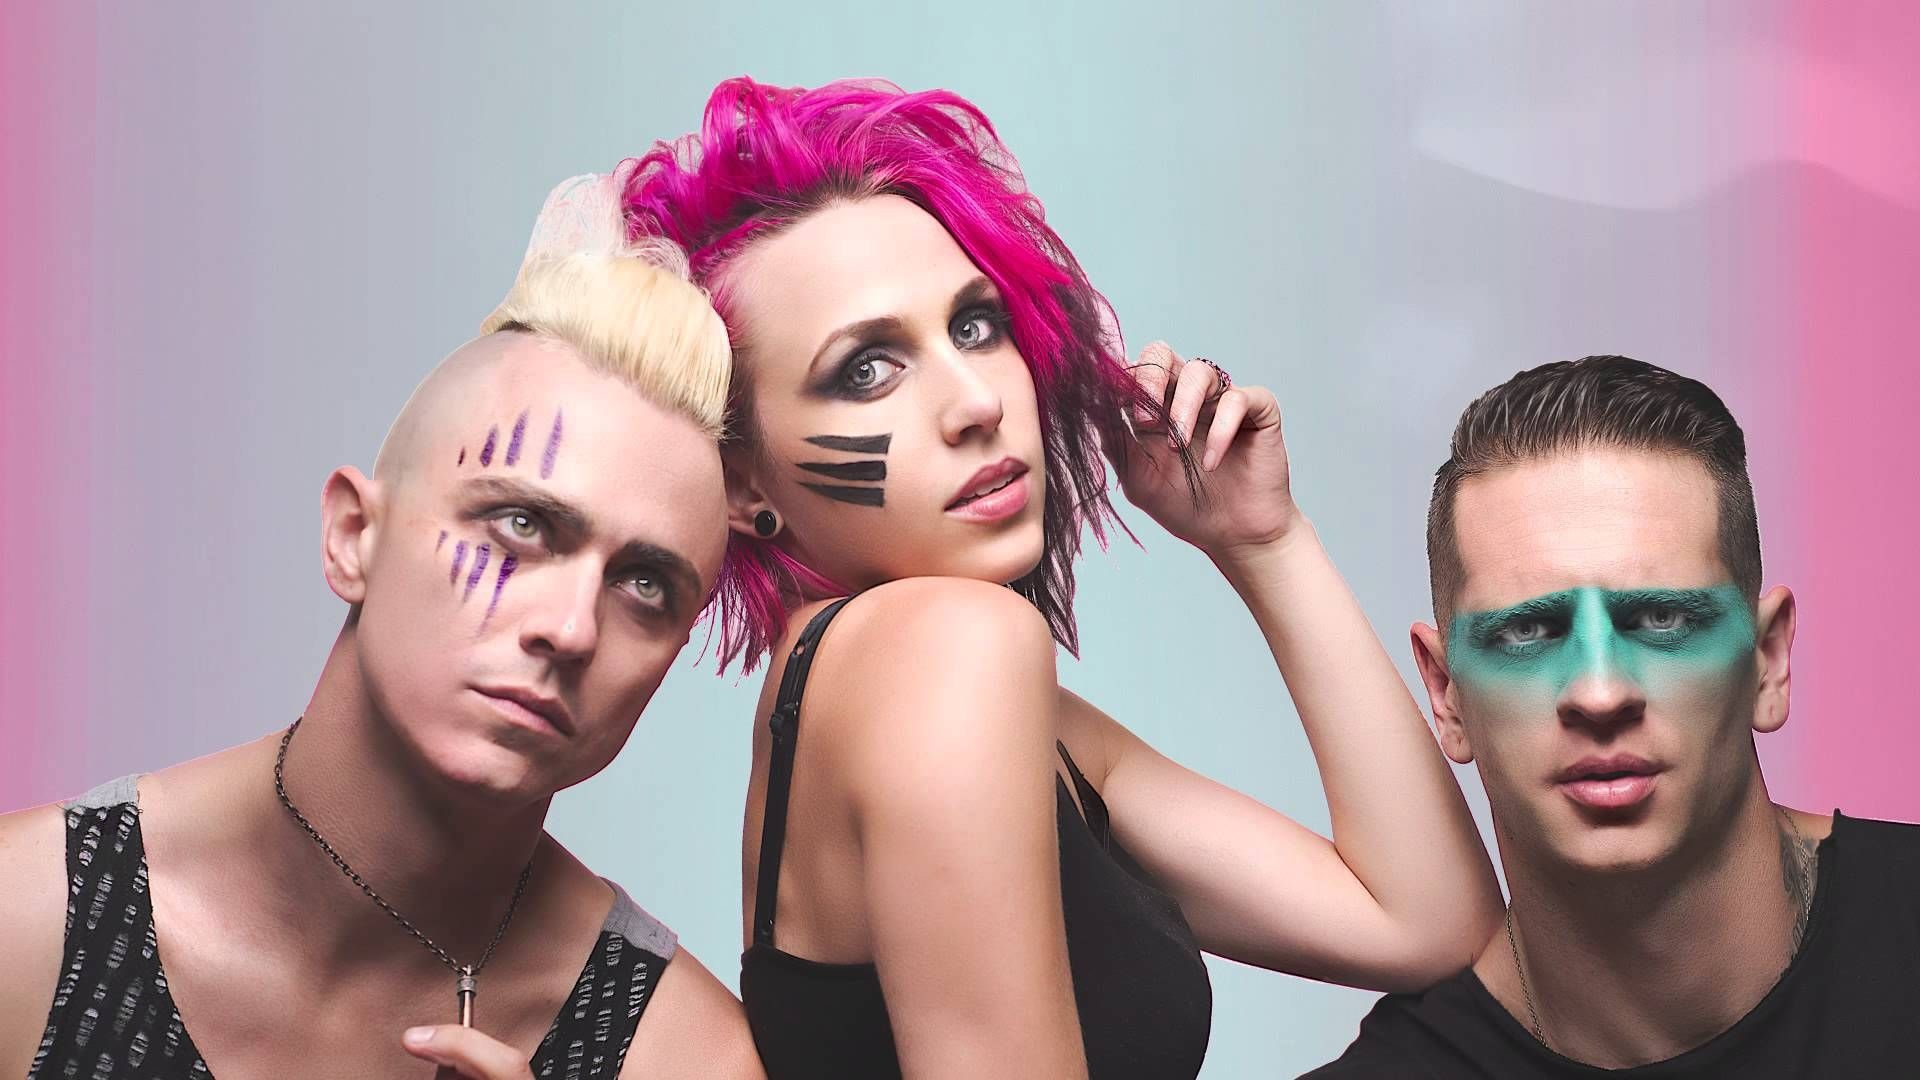 Icon For Hire, Ariel's hairstyles, Band's empowering message, Hiring process, 1920x1080 Full HD Desktop